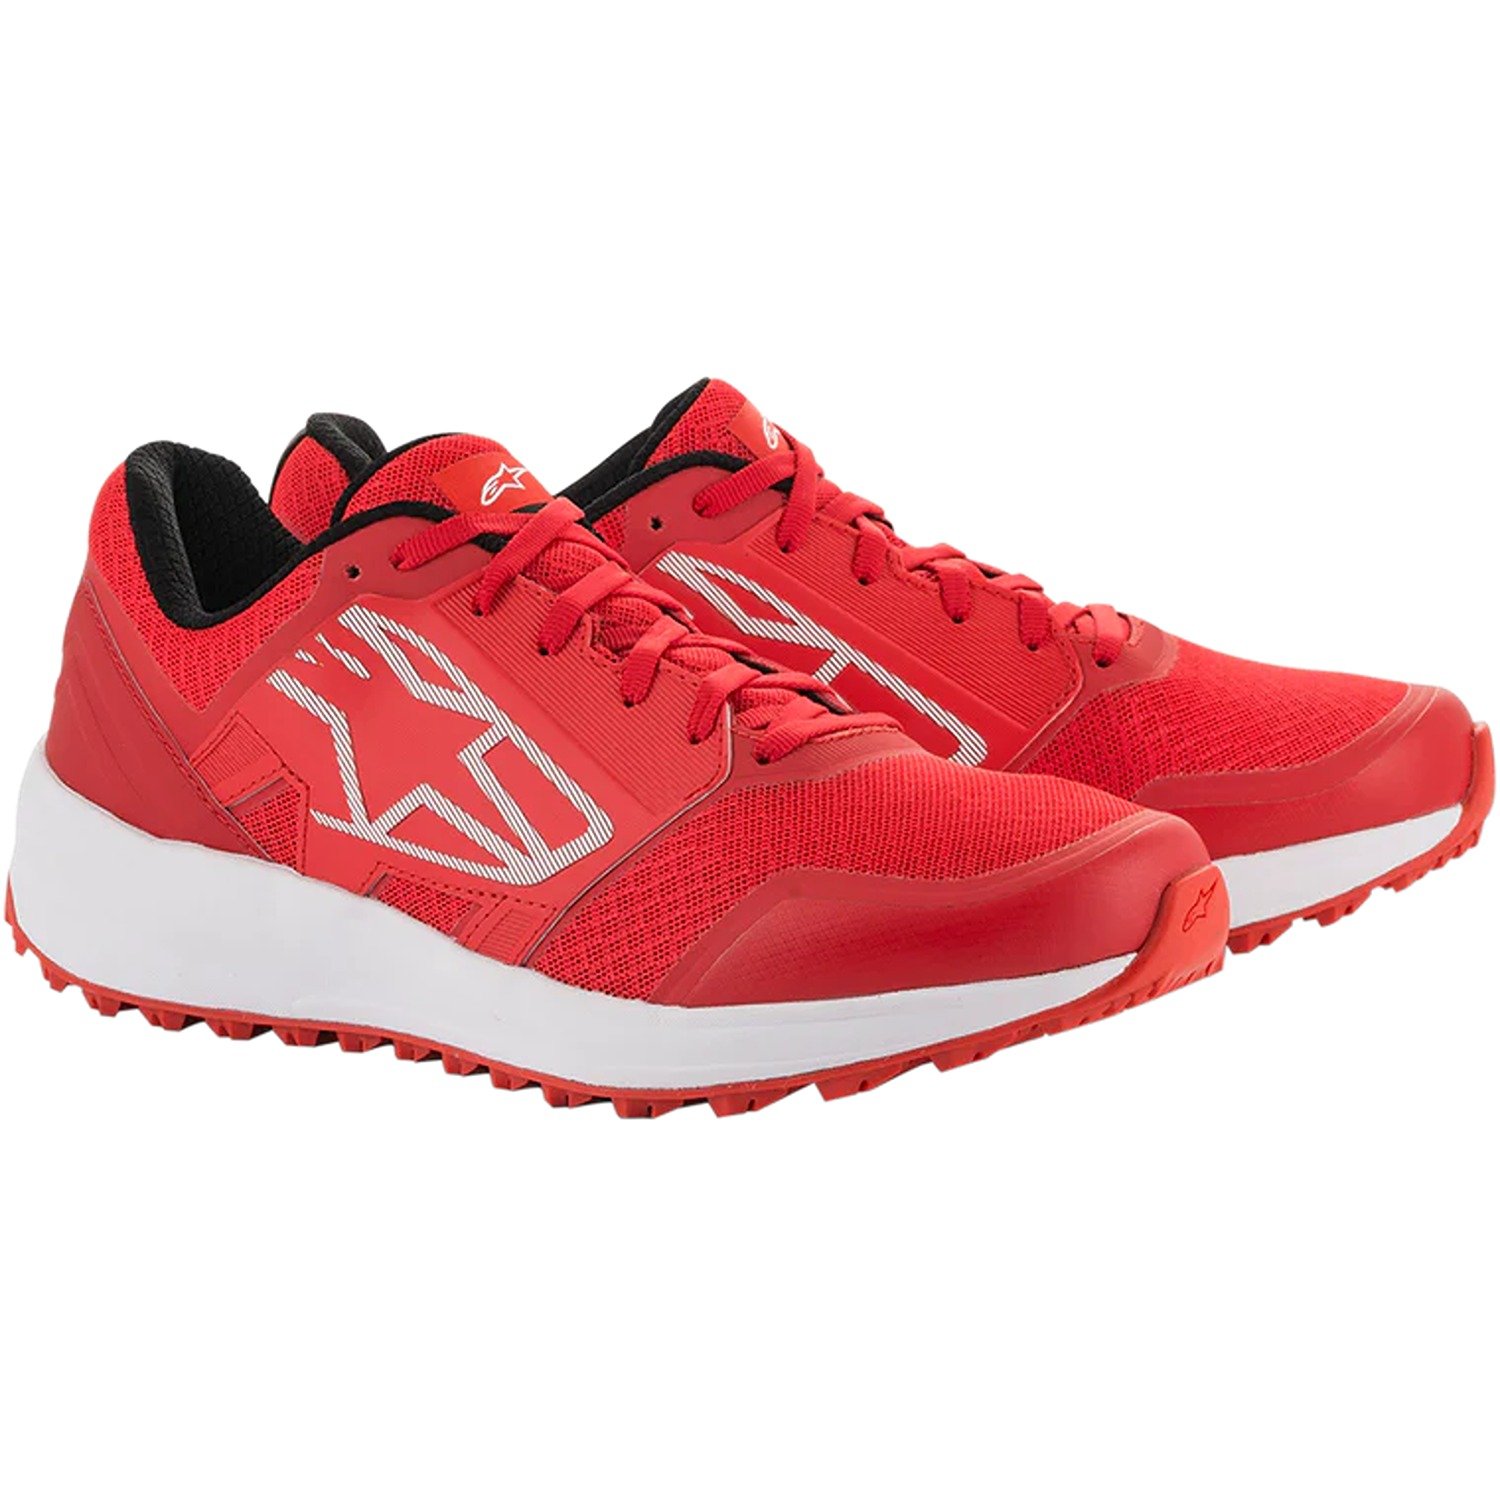 Image of Alpinestars Meta Trail Shoes Red White Size US 125 ID 8059175092176